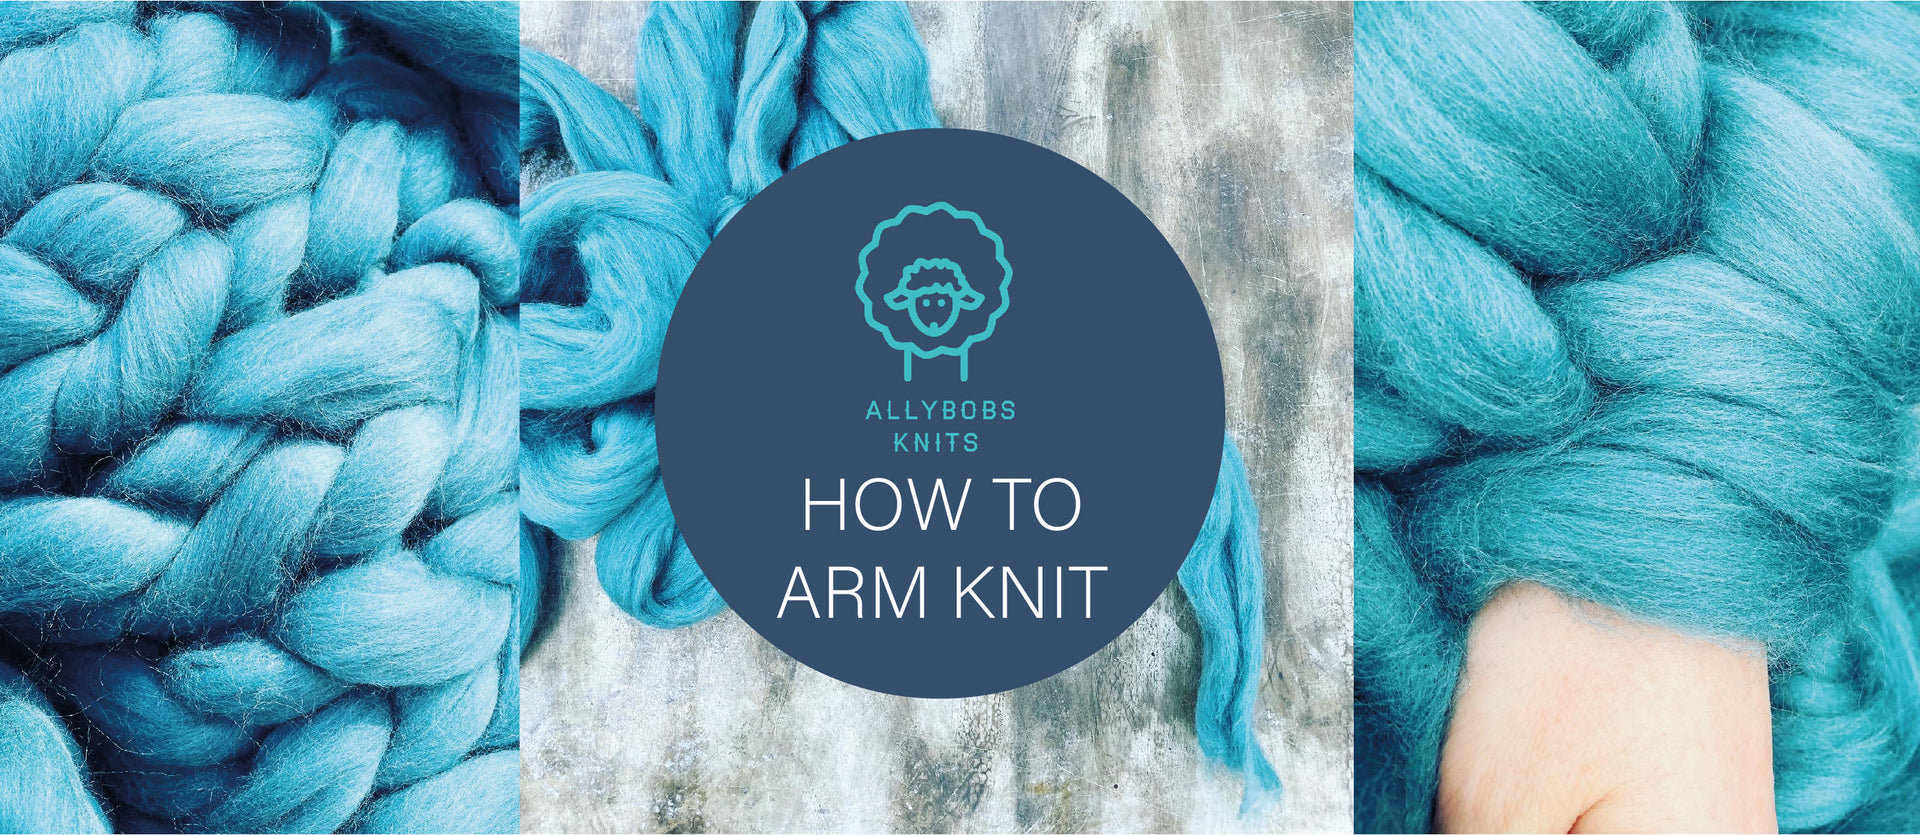 Load video: video of arm knitting